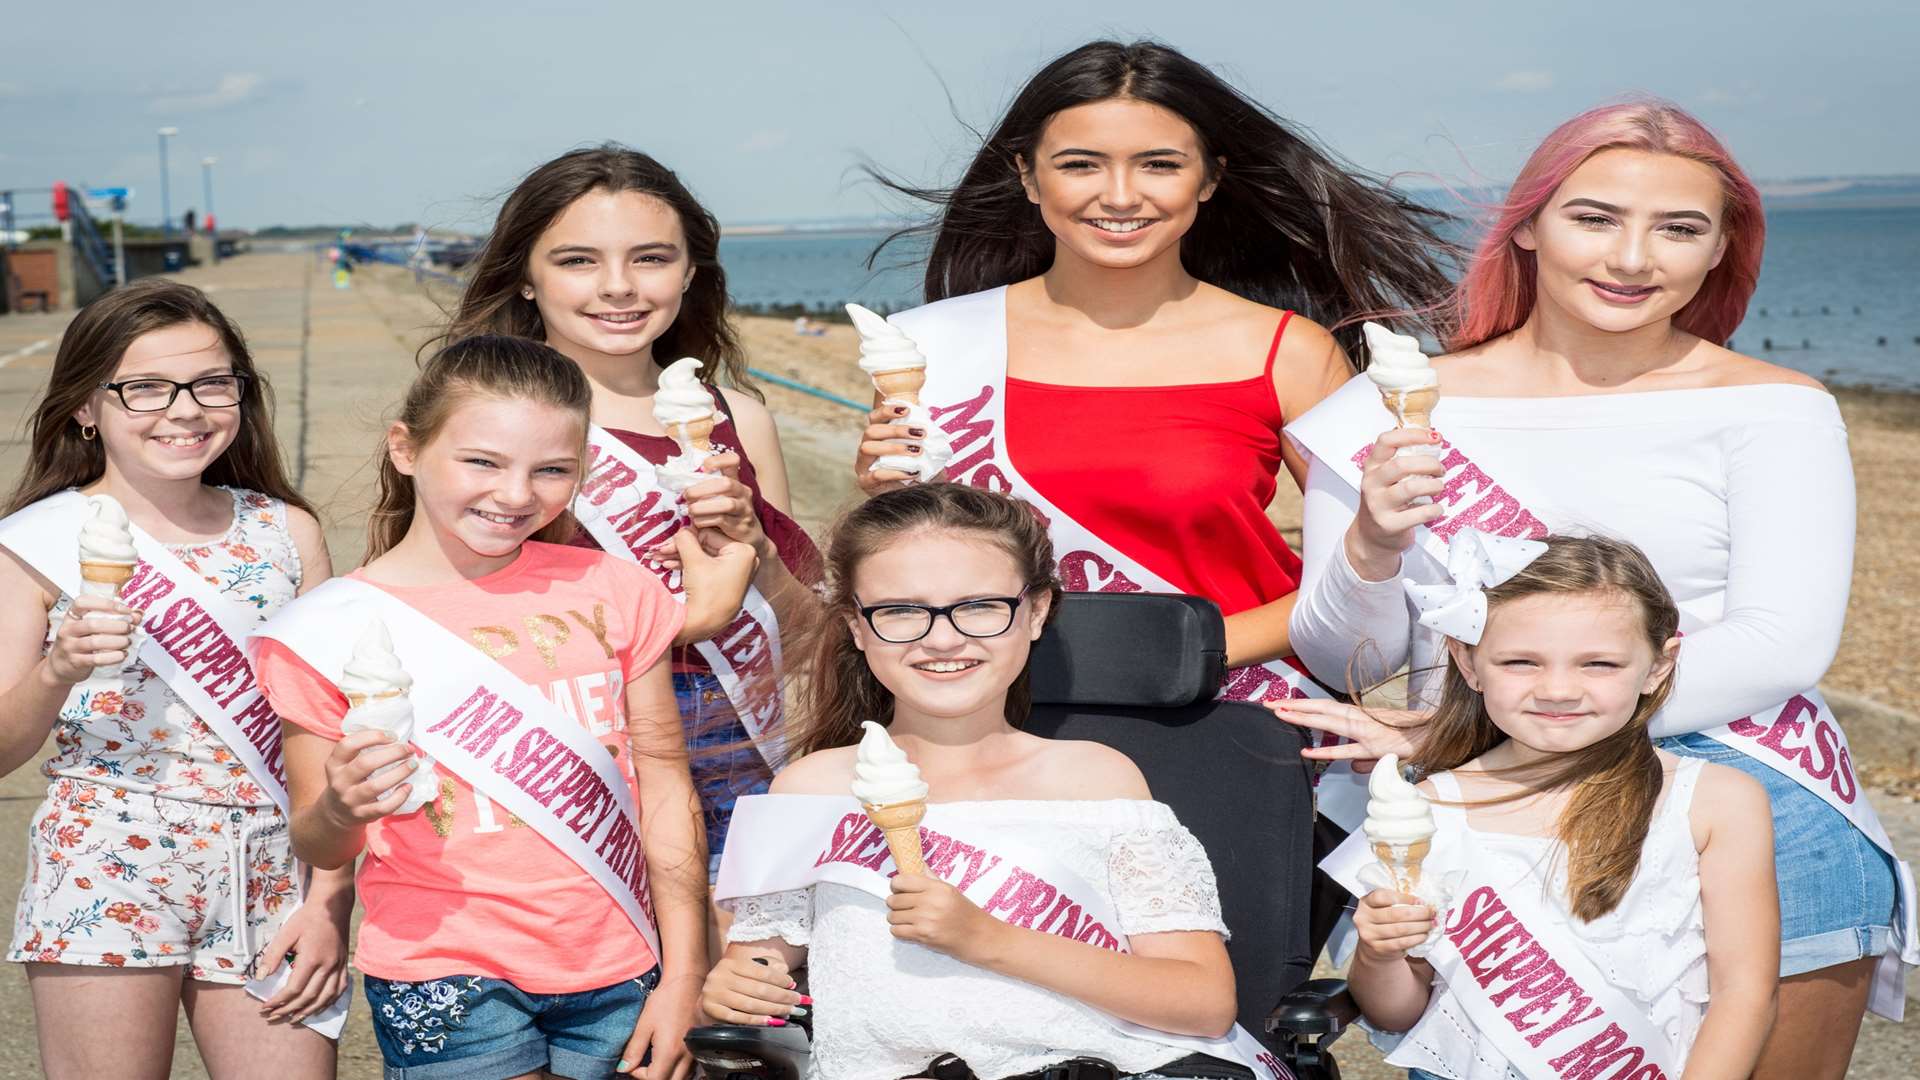 Sheppey carnival court: From the left, Georgia-May Stower, 13, Kiera Collins-Kiazim, 11, Darcey Kidd, 12, Abigail Bolt-Mead, 13, Emily Pope, 13, Faith Chawner, 16, and Poppy Holland-Rowe, 7